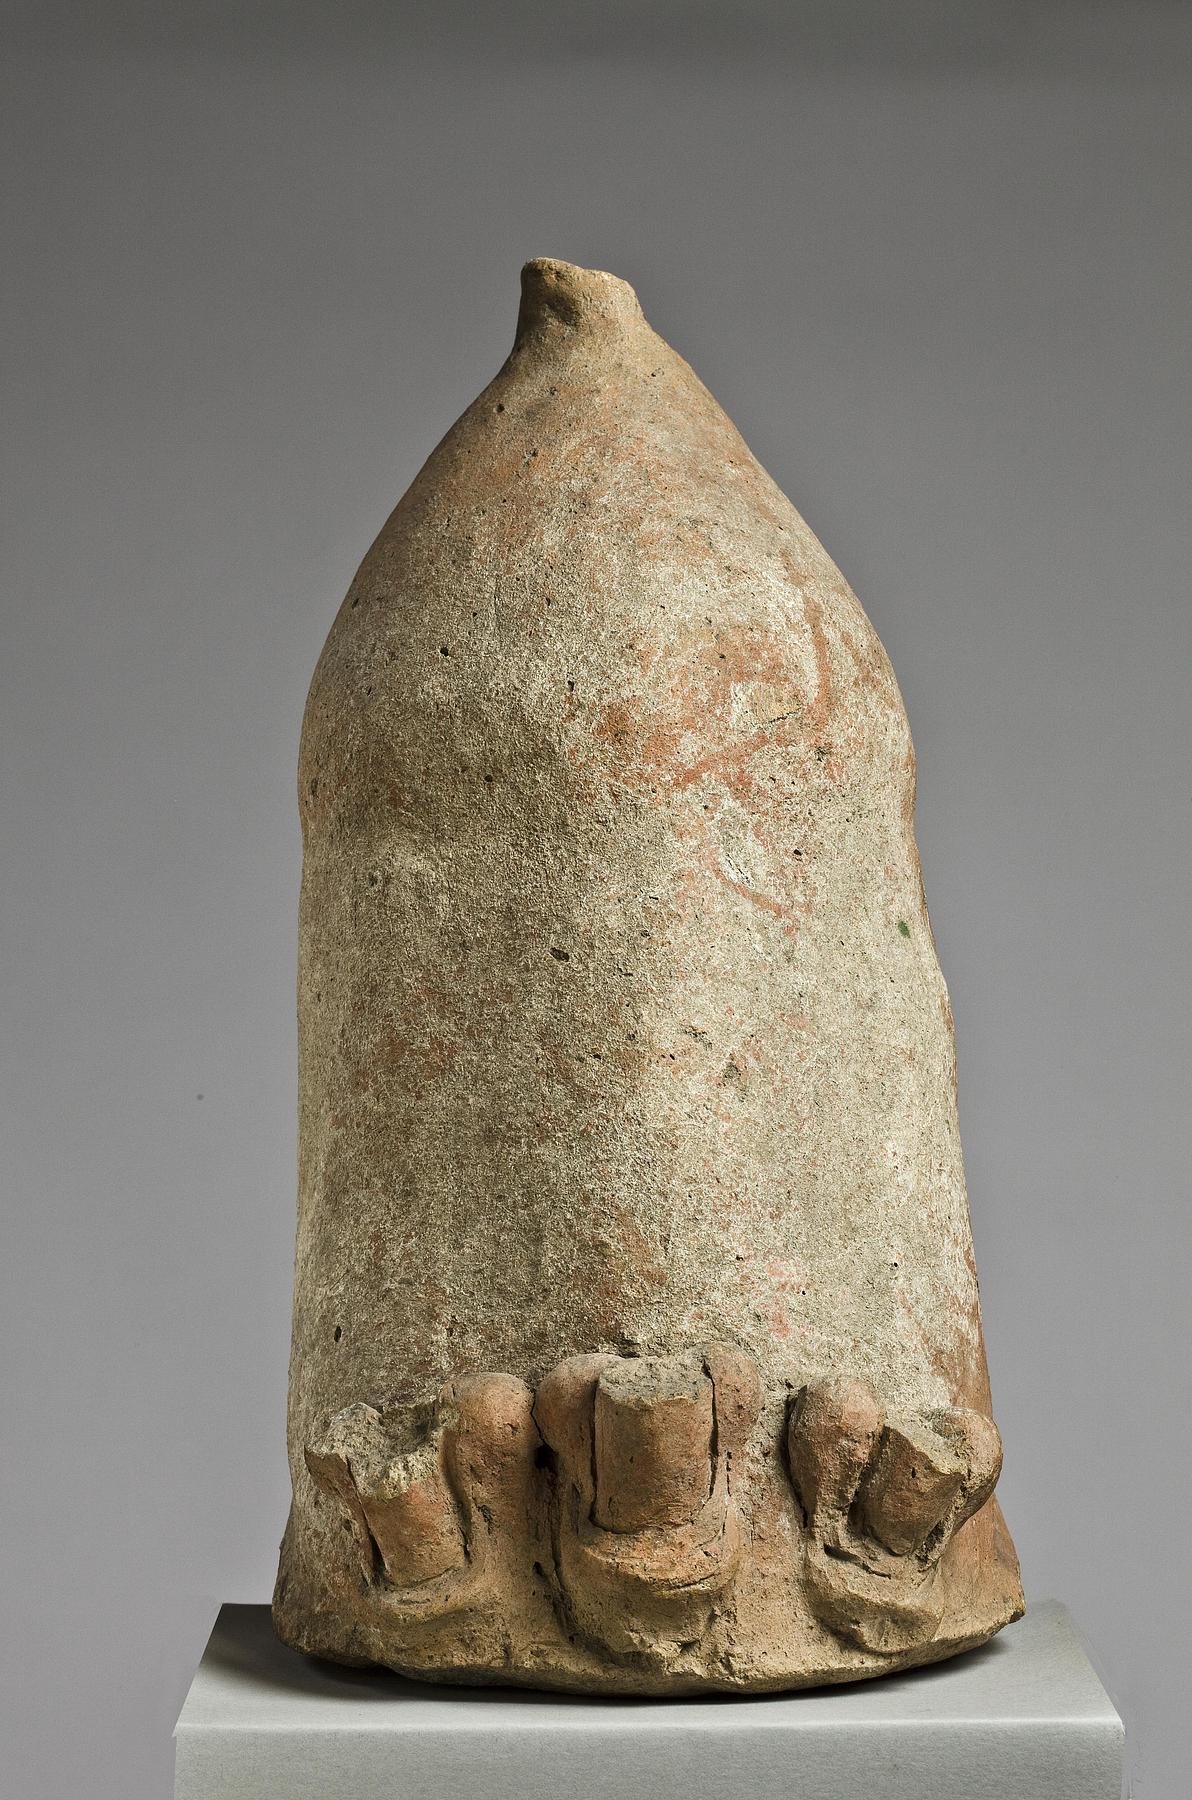 Anatomical votive in the shape of a colossal phallus with three minor phalloi, H1268